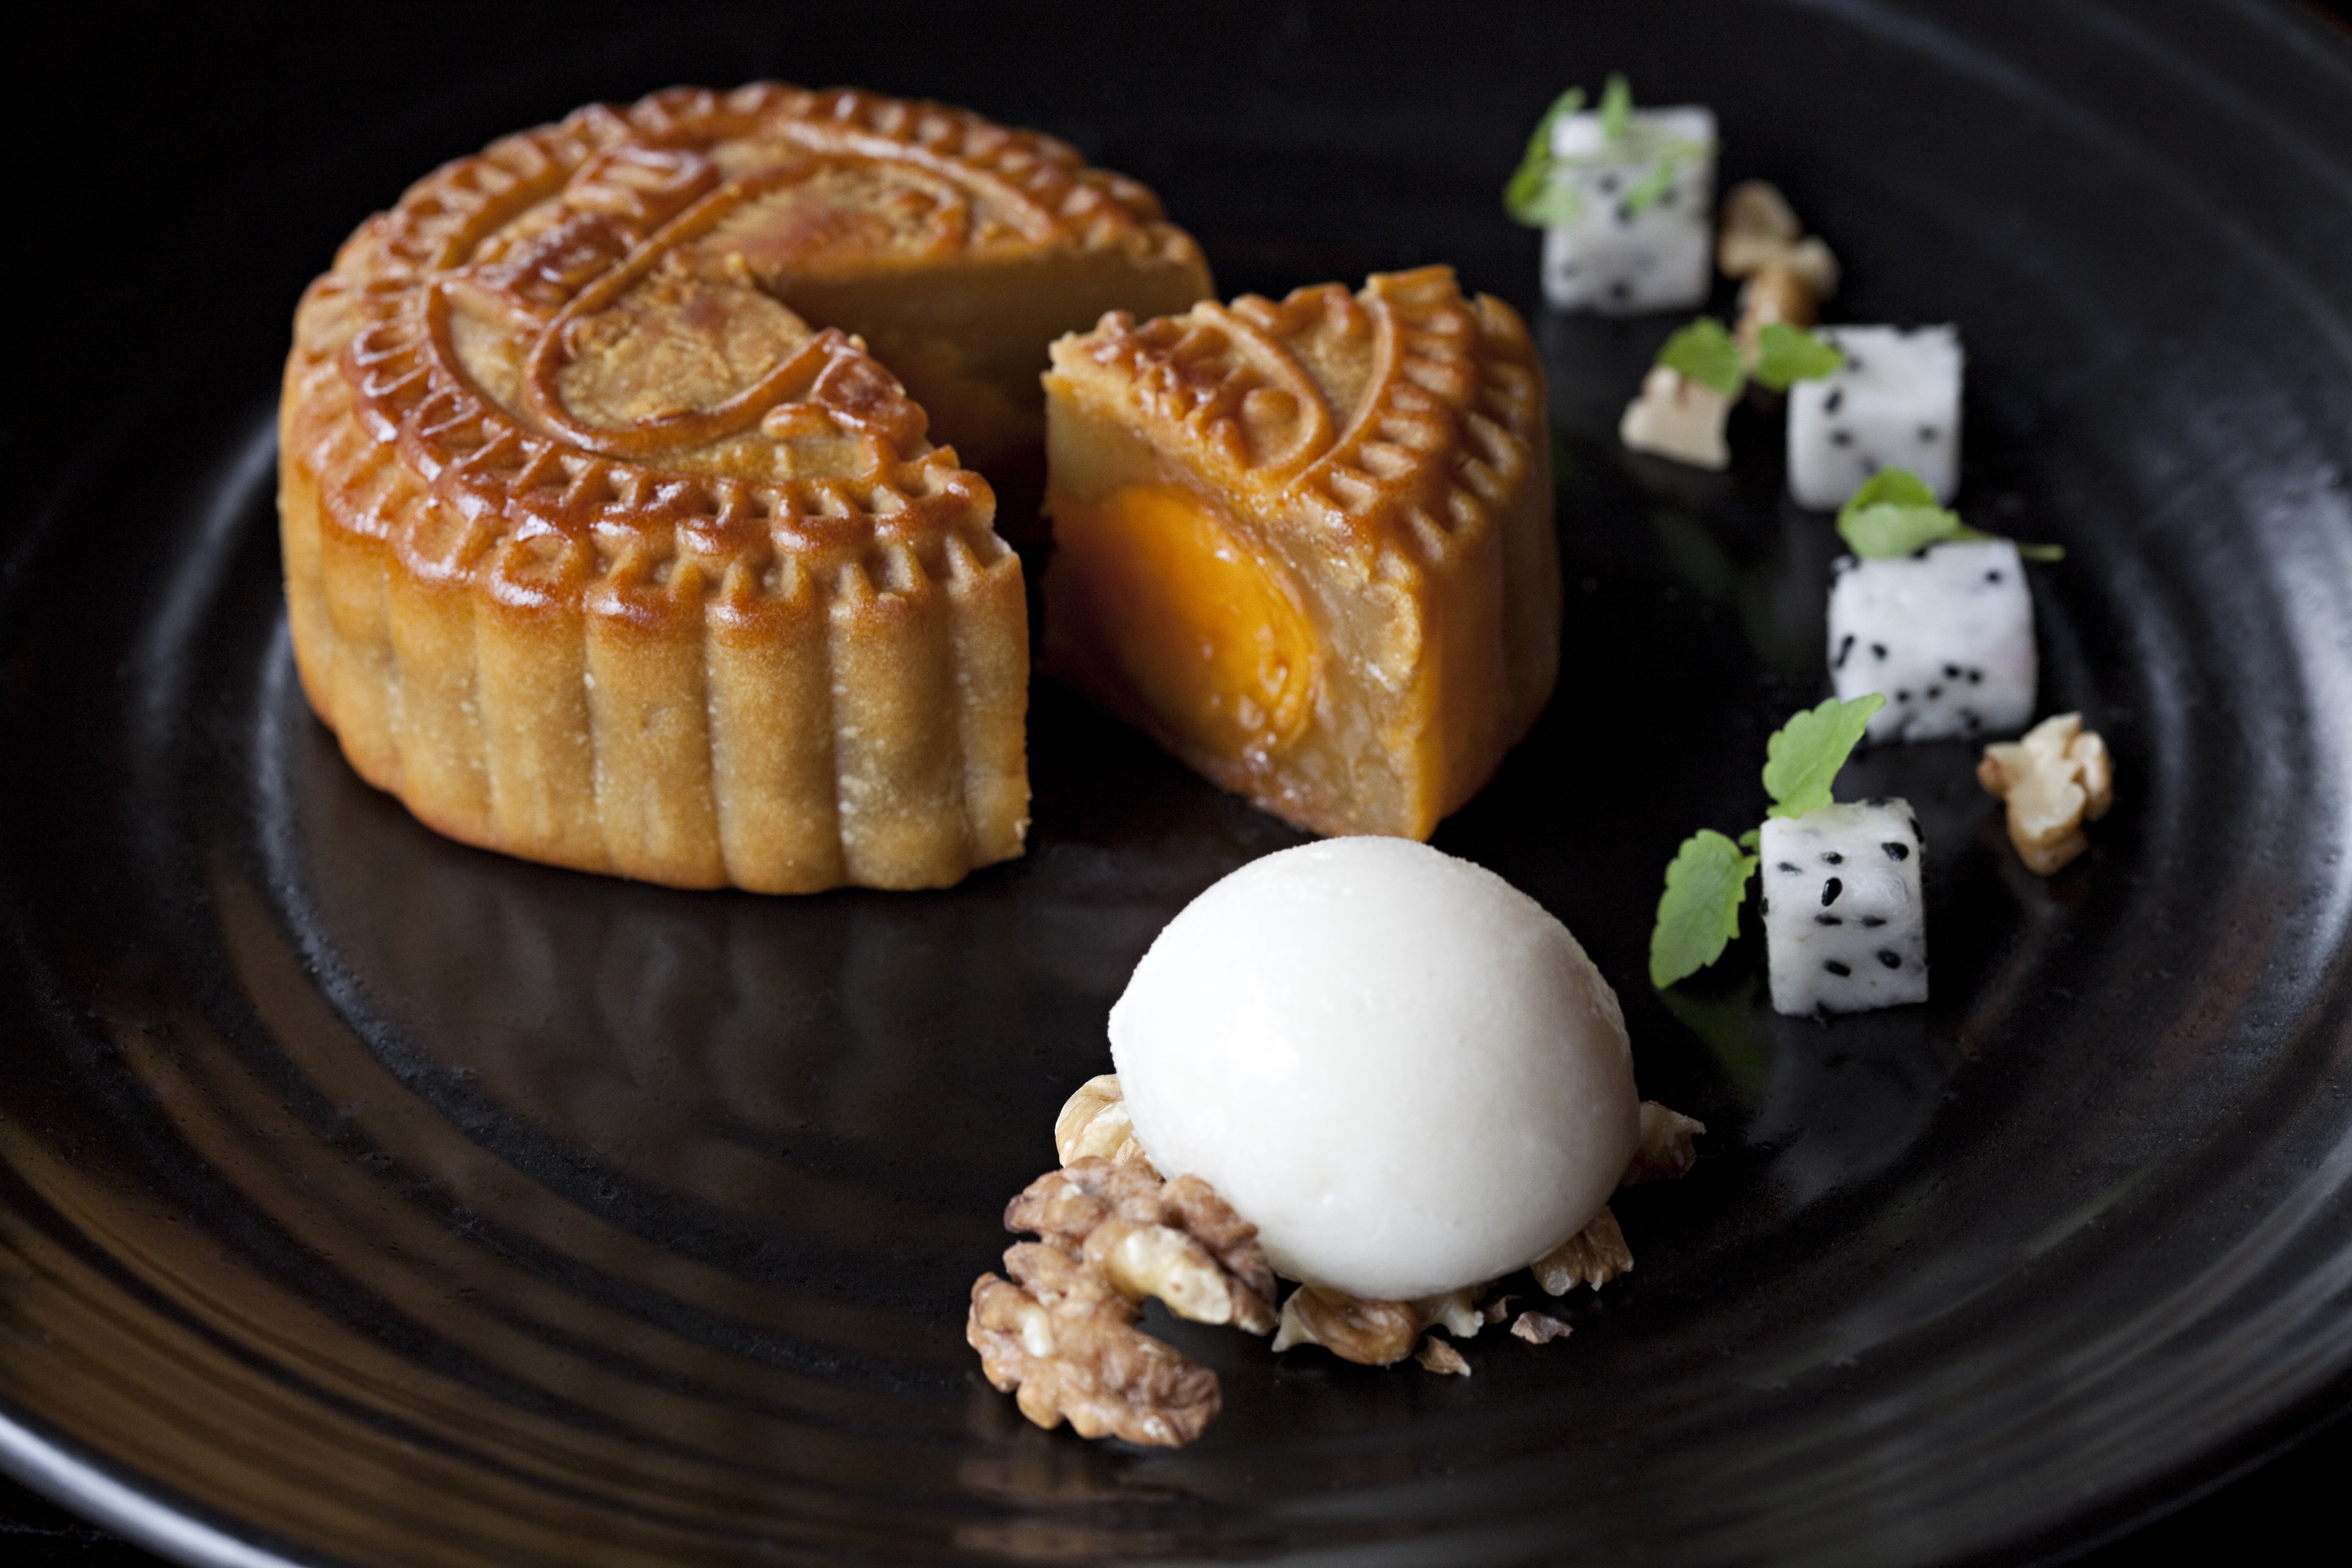 Traditional mooncake served with lychee sorbet